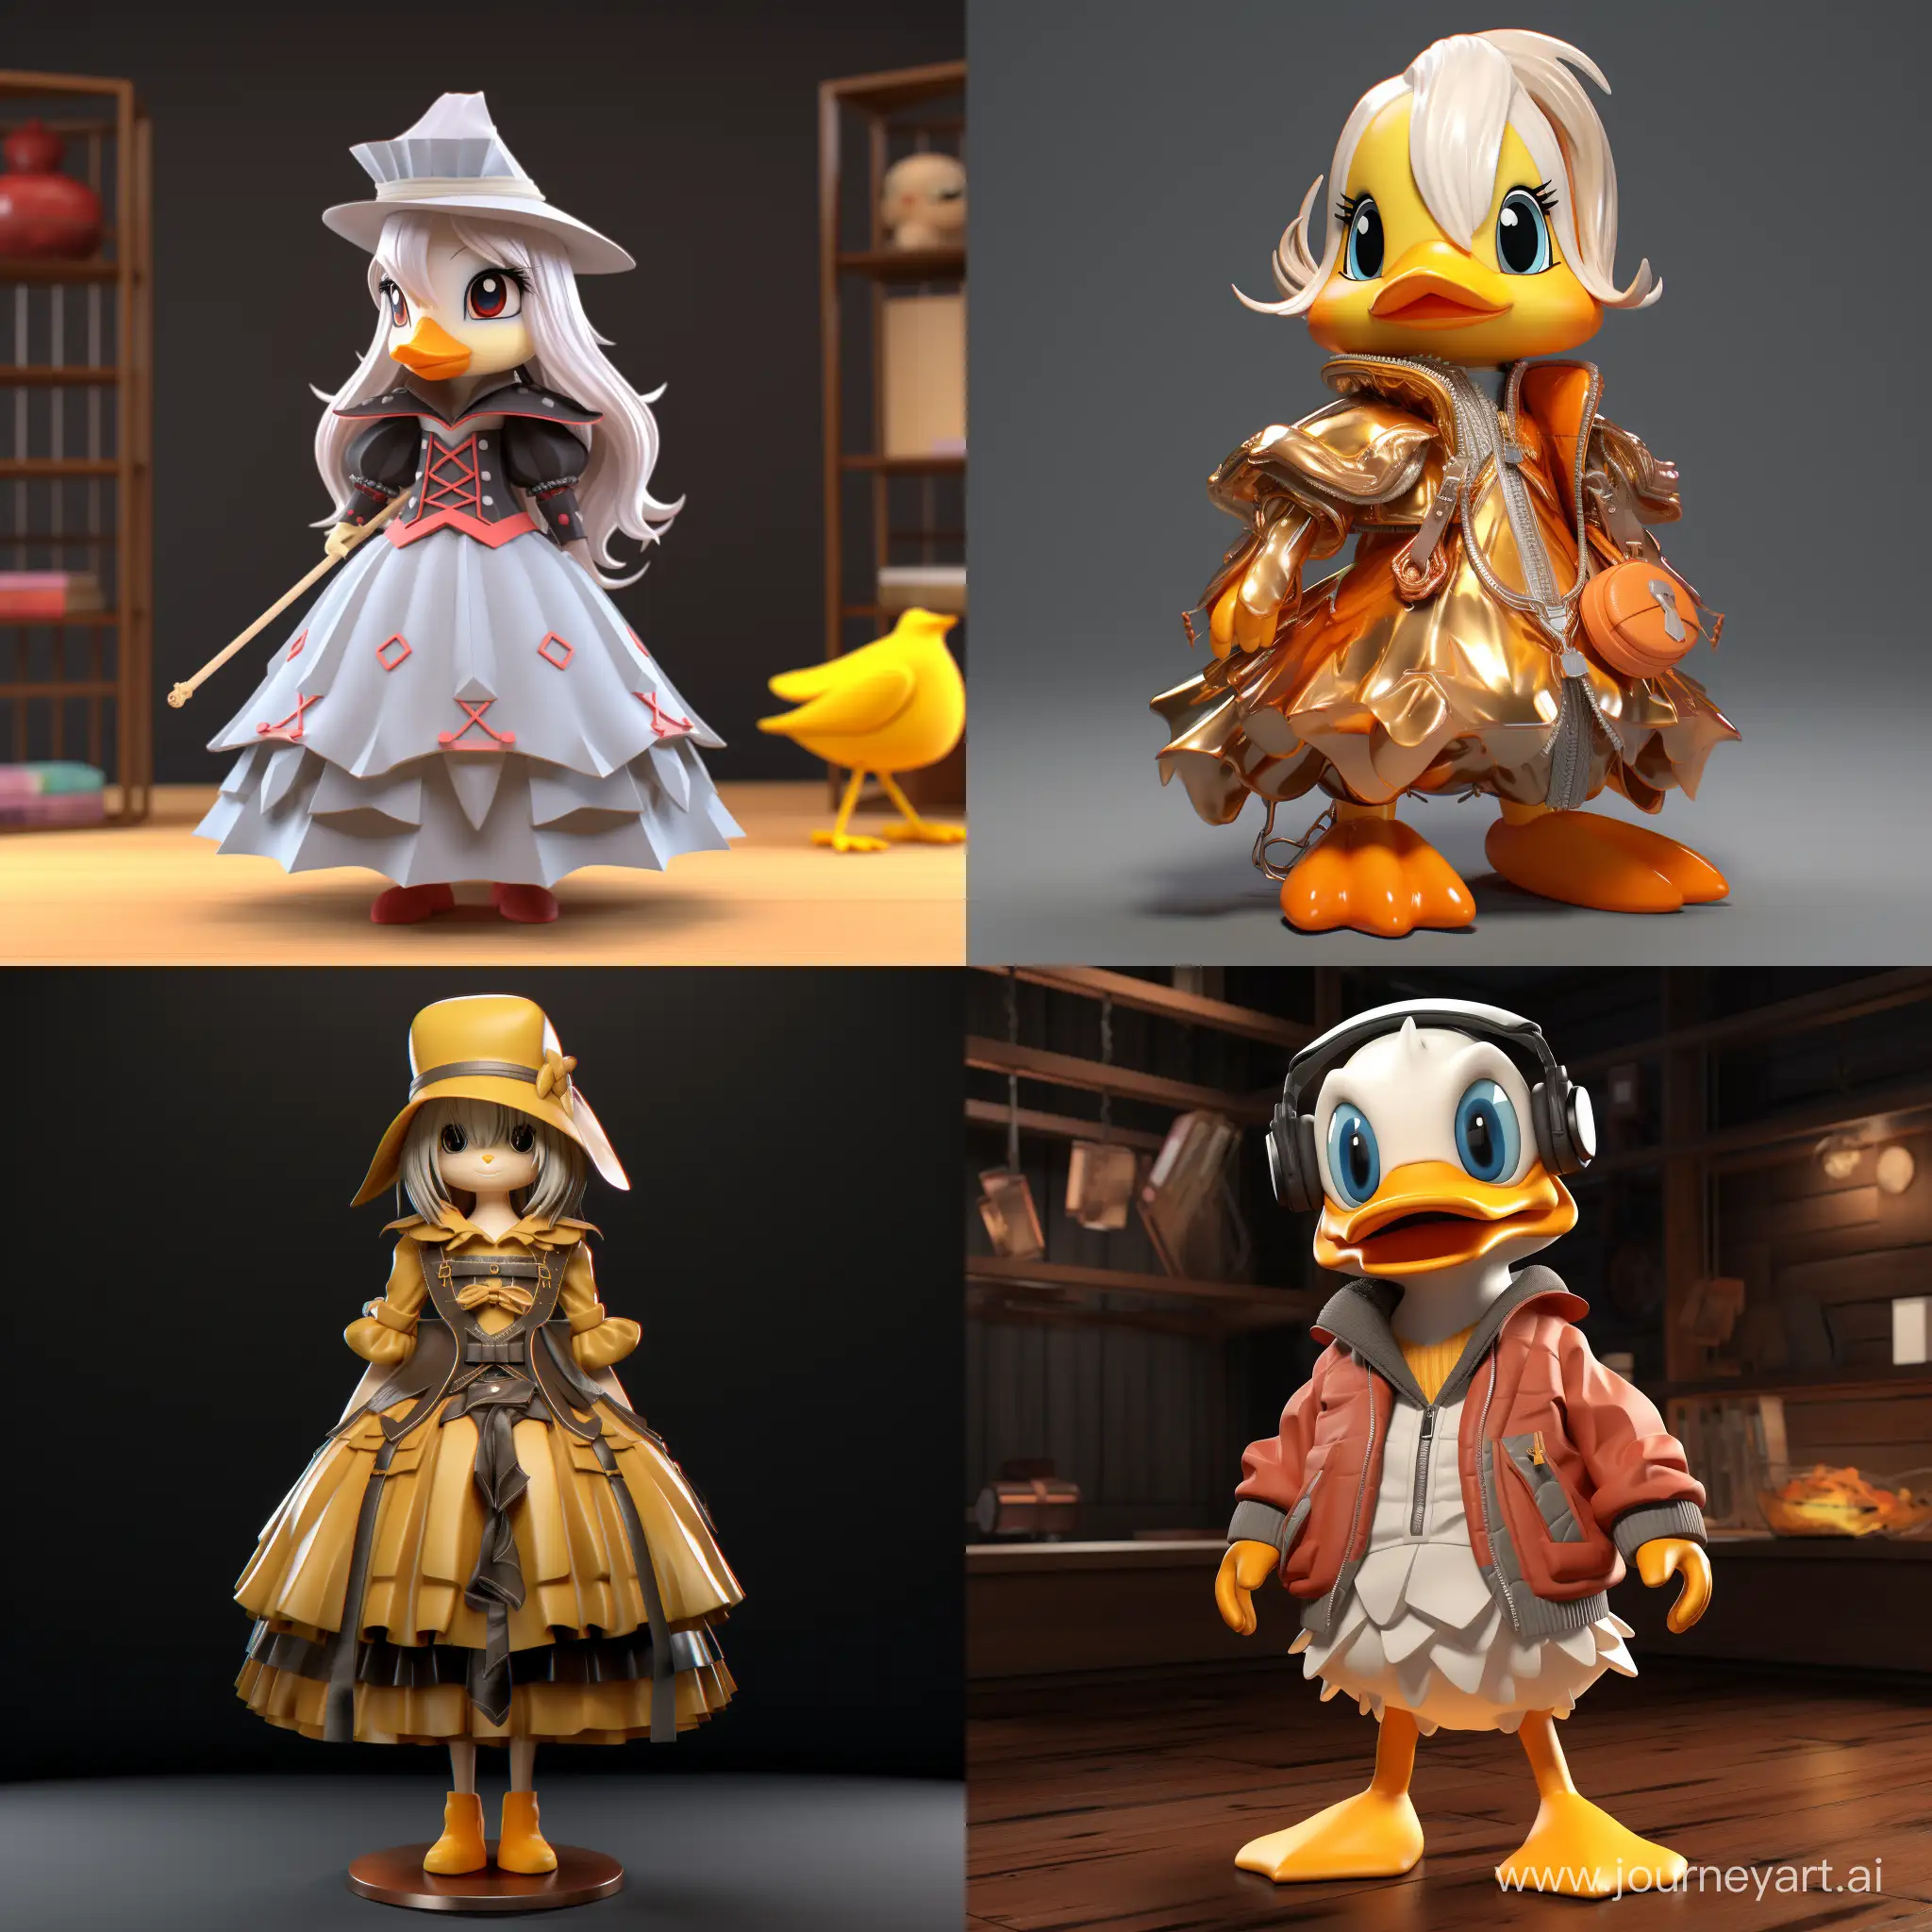 Adorable-3D-Anime-Duck-in-Full-Costume-Standing-Front-and-Center